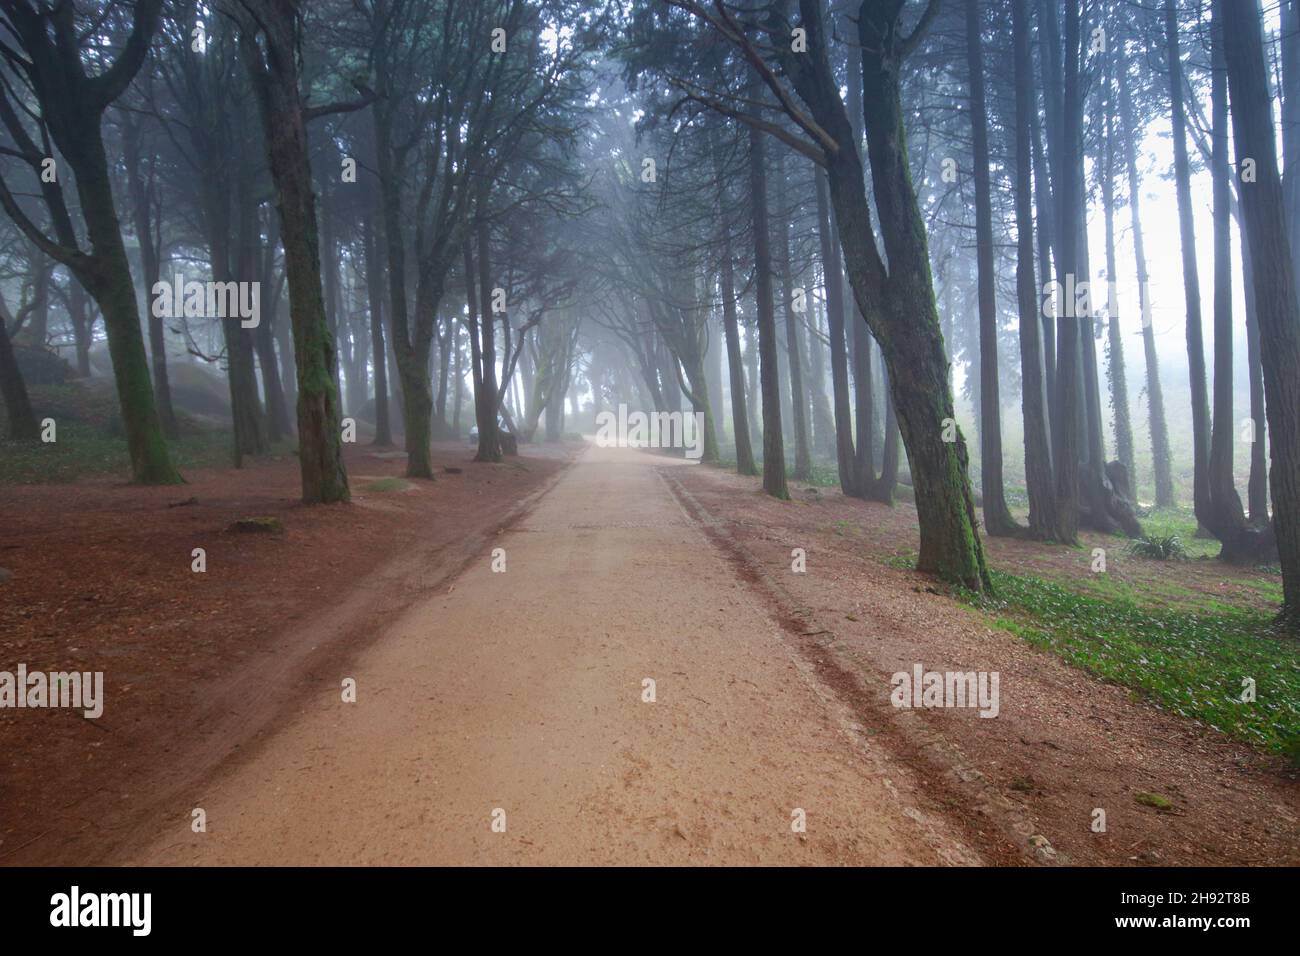 Path in a forest covered with mist and surrounded by trees. Beautiful mystical dark Foggy wood Stock Photo